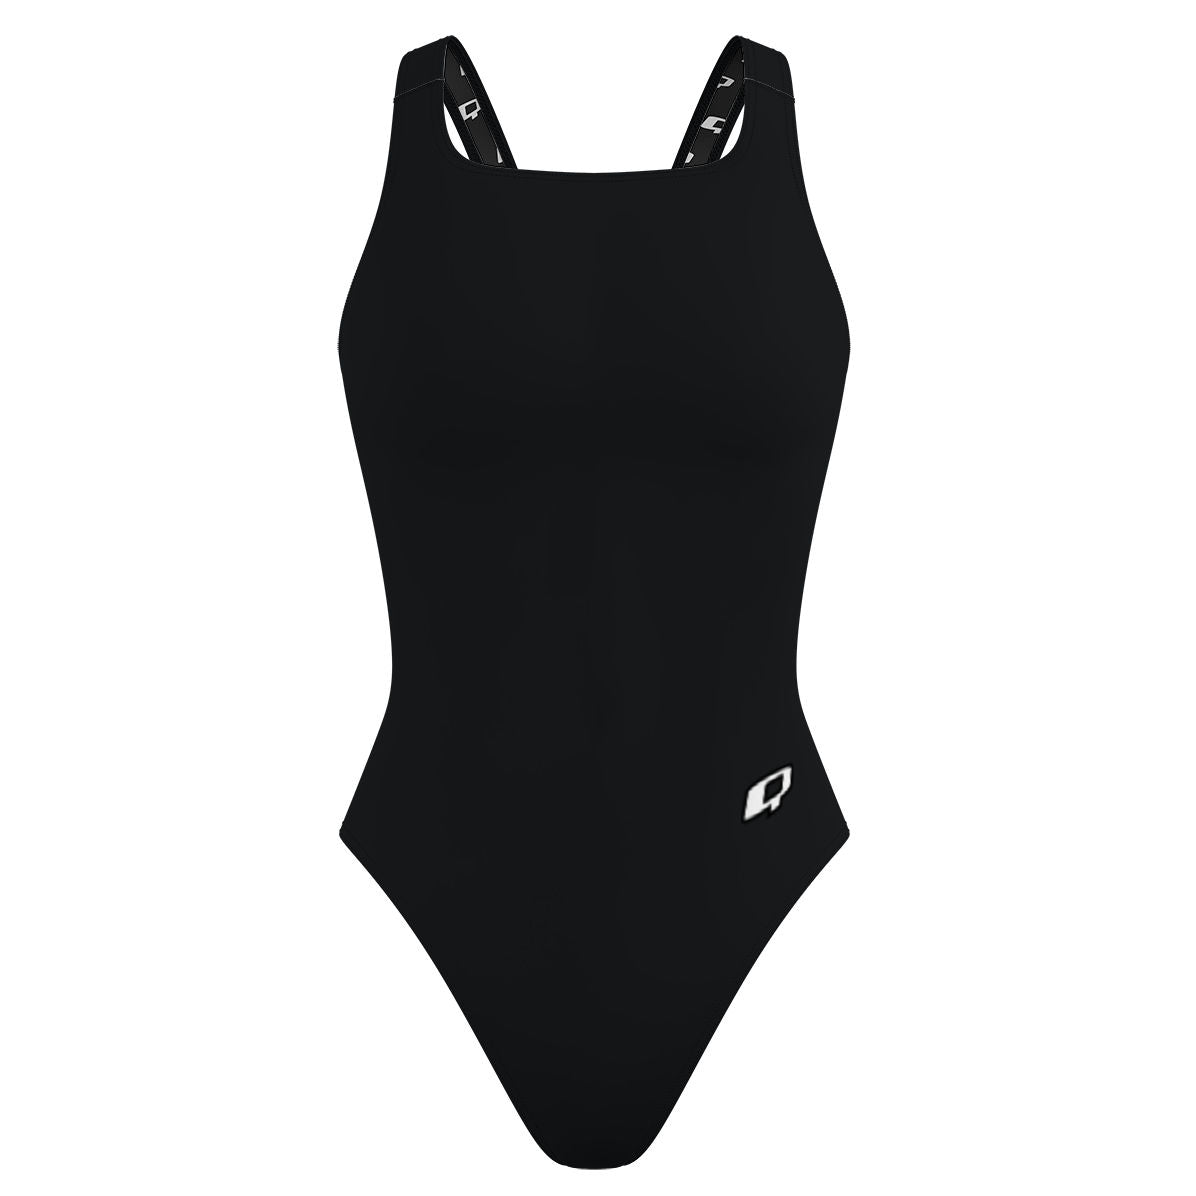 Q Solid Suits 24 - Solid Classic Strap Swimsuit